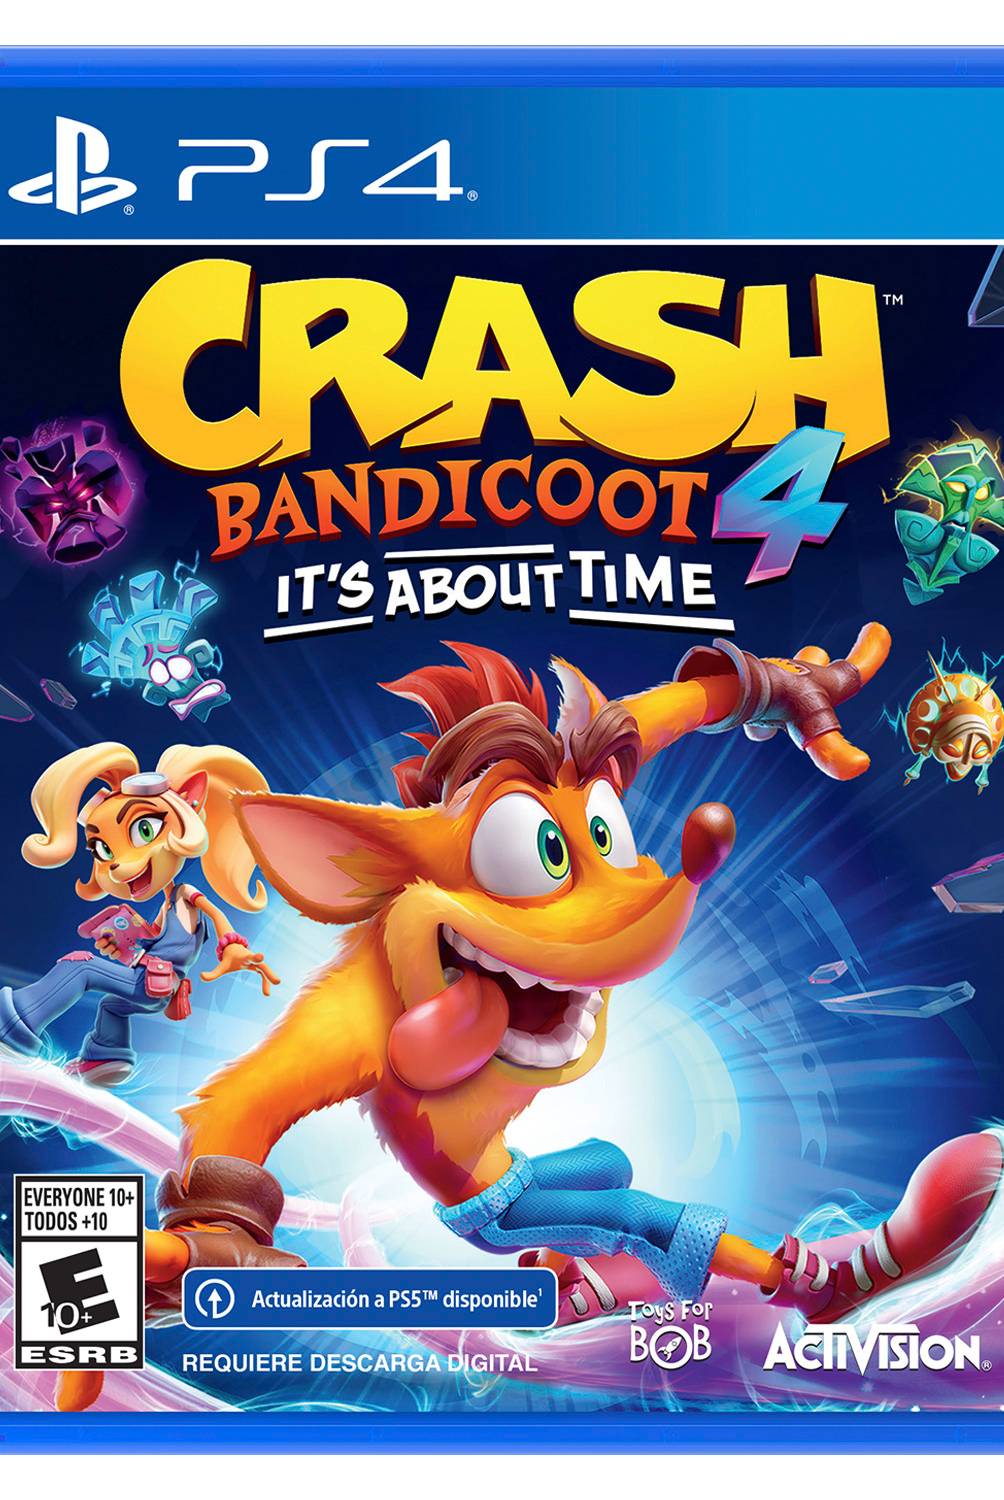 Activision - Videojuego Crash Bandicoot4 Its About Time PS4